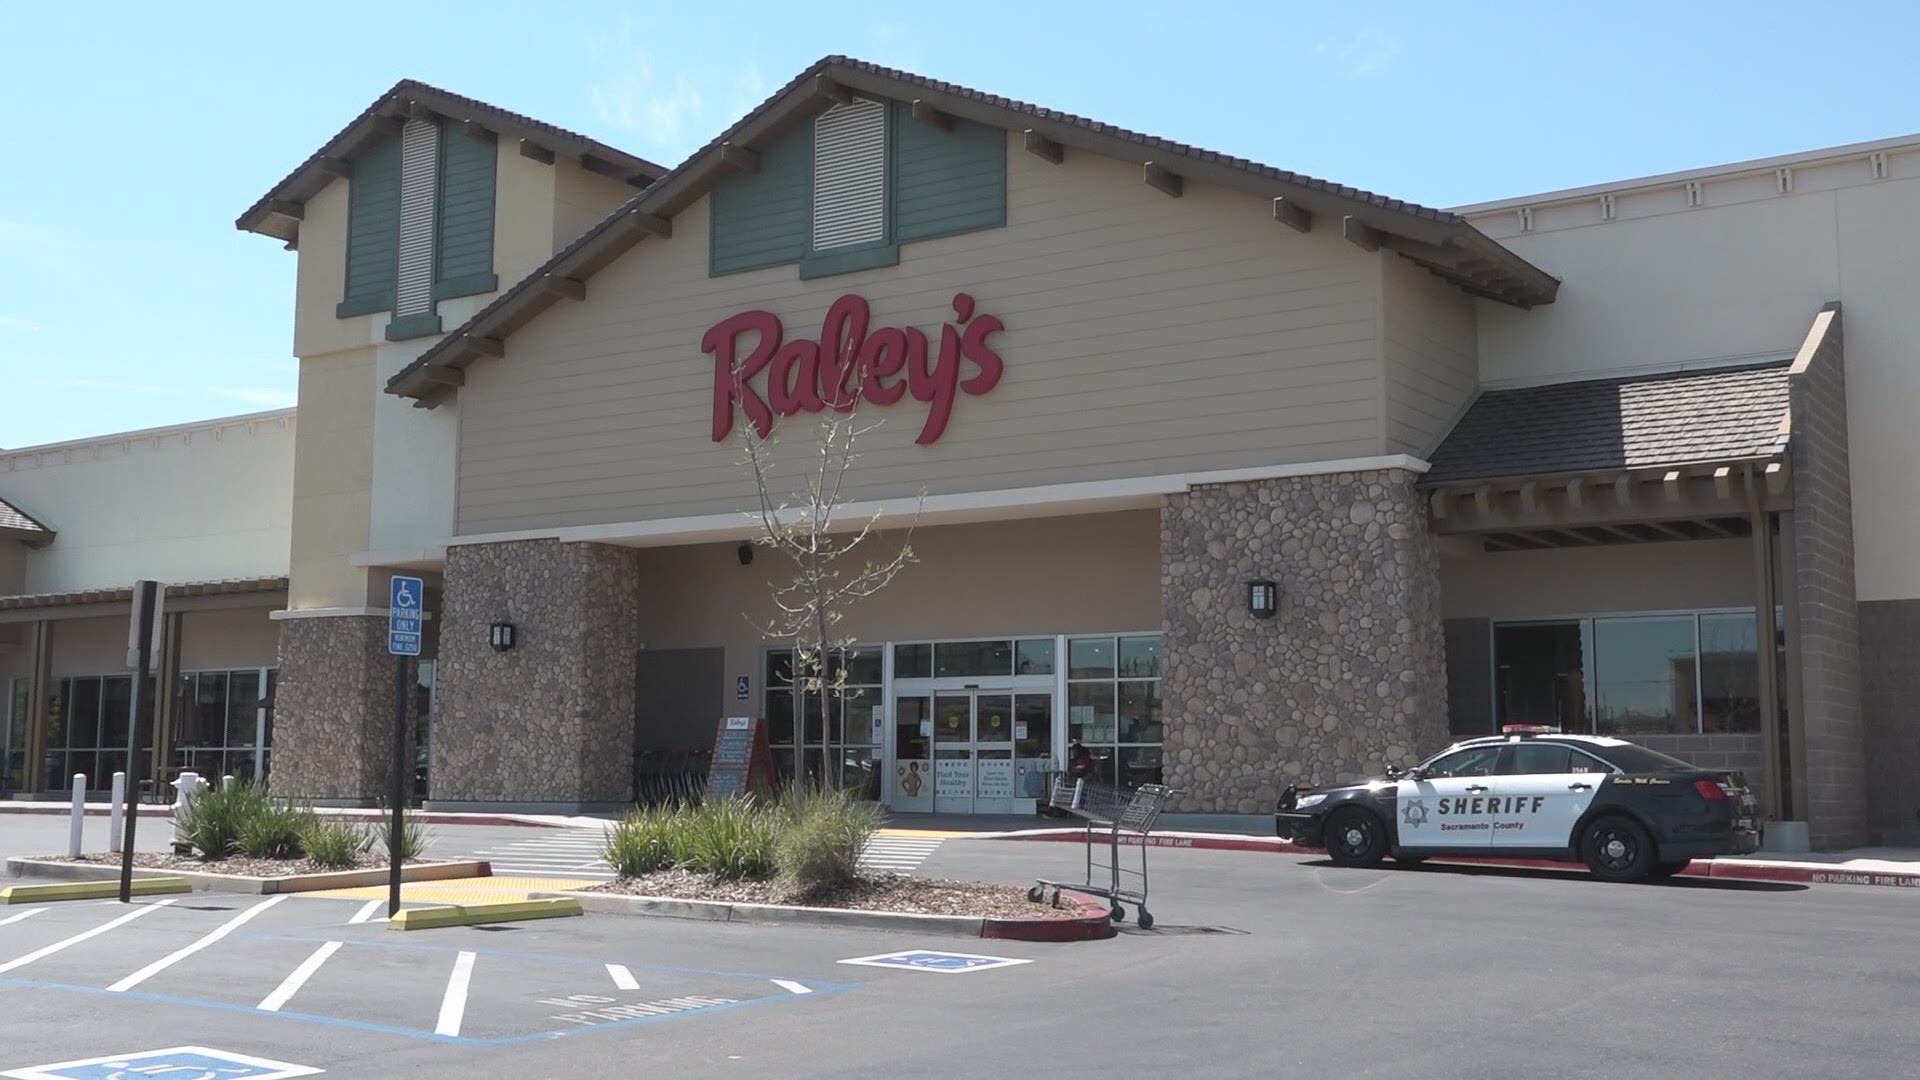 Sacramento Republic FC teams up with Raley's to deliver food to seniors during pandemic for free